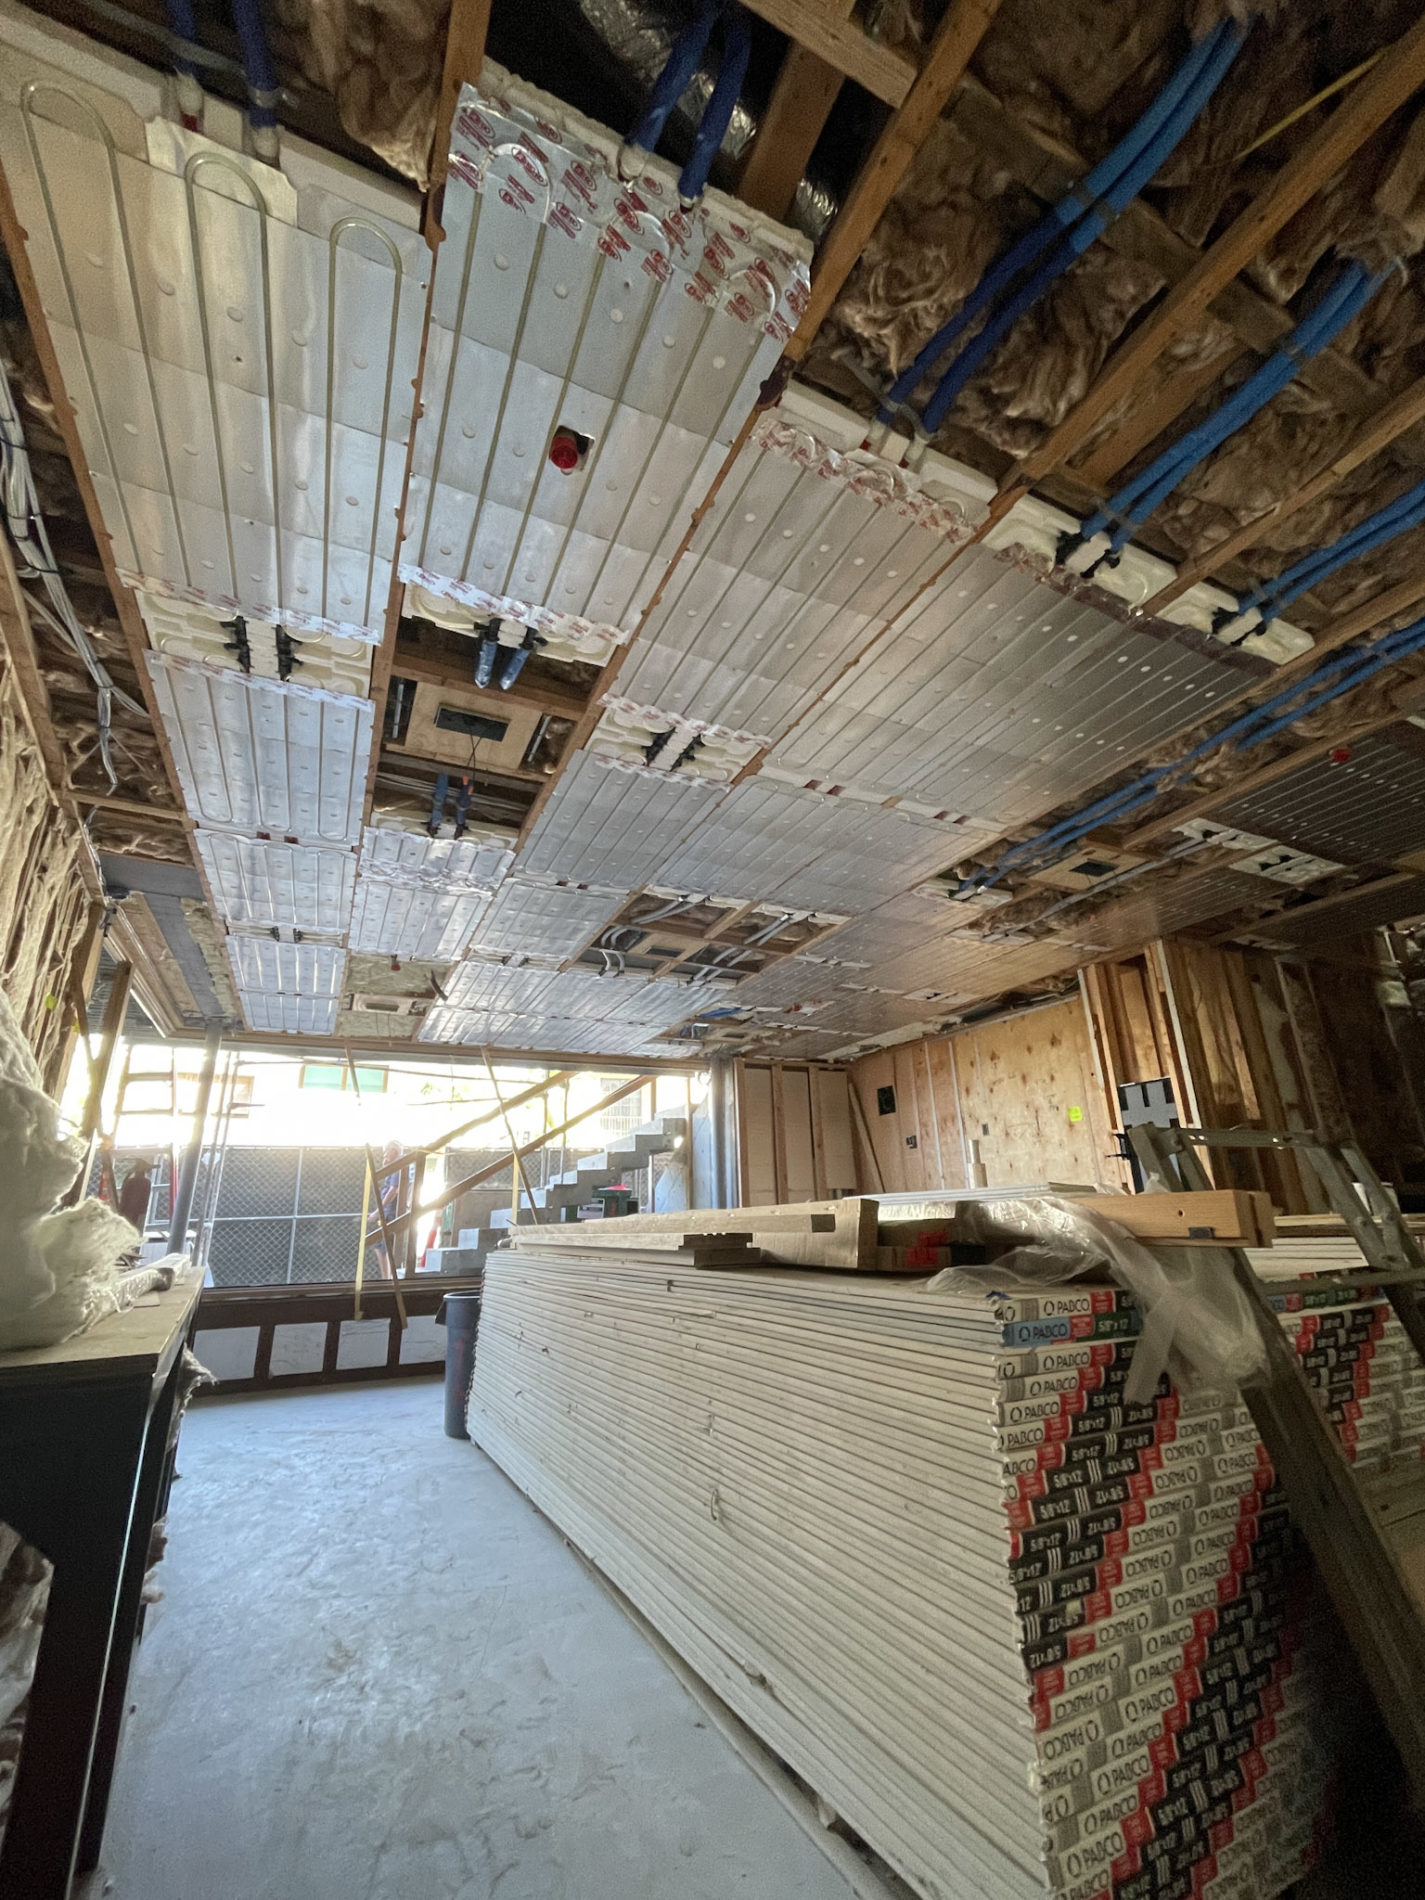 Radiant Ceiling Installed before it is covered with drywall